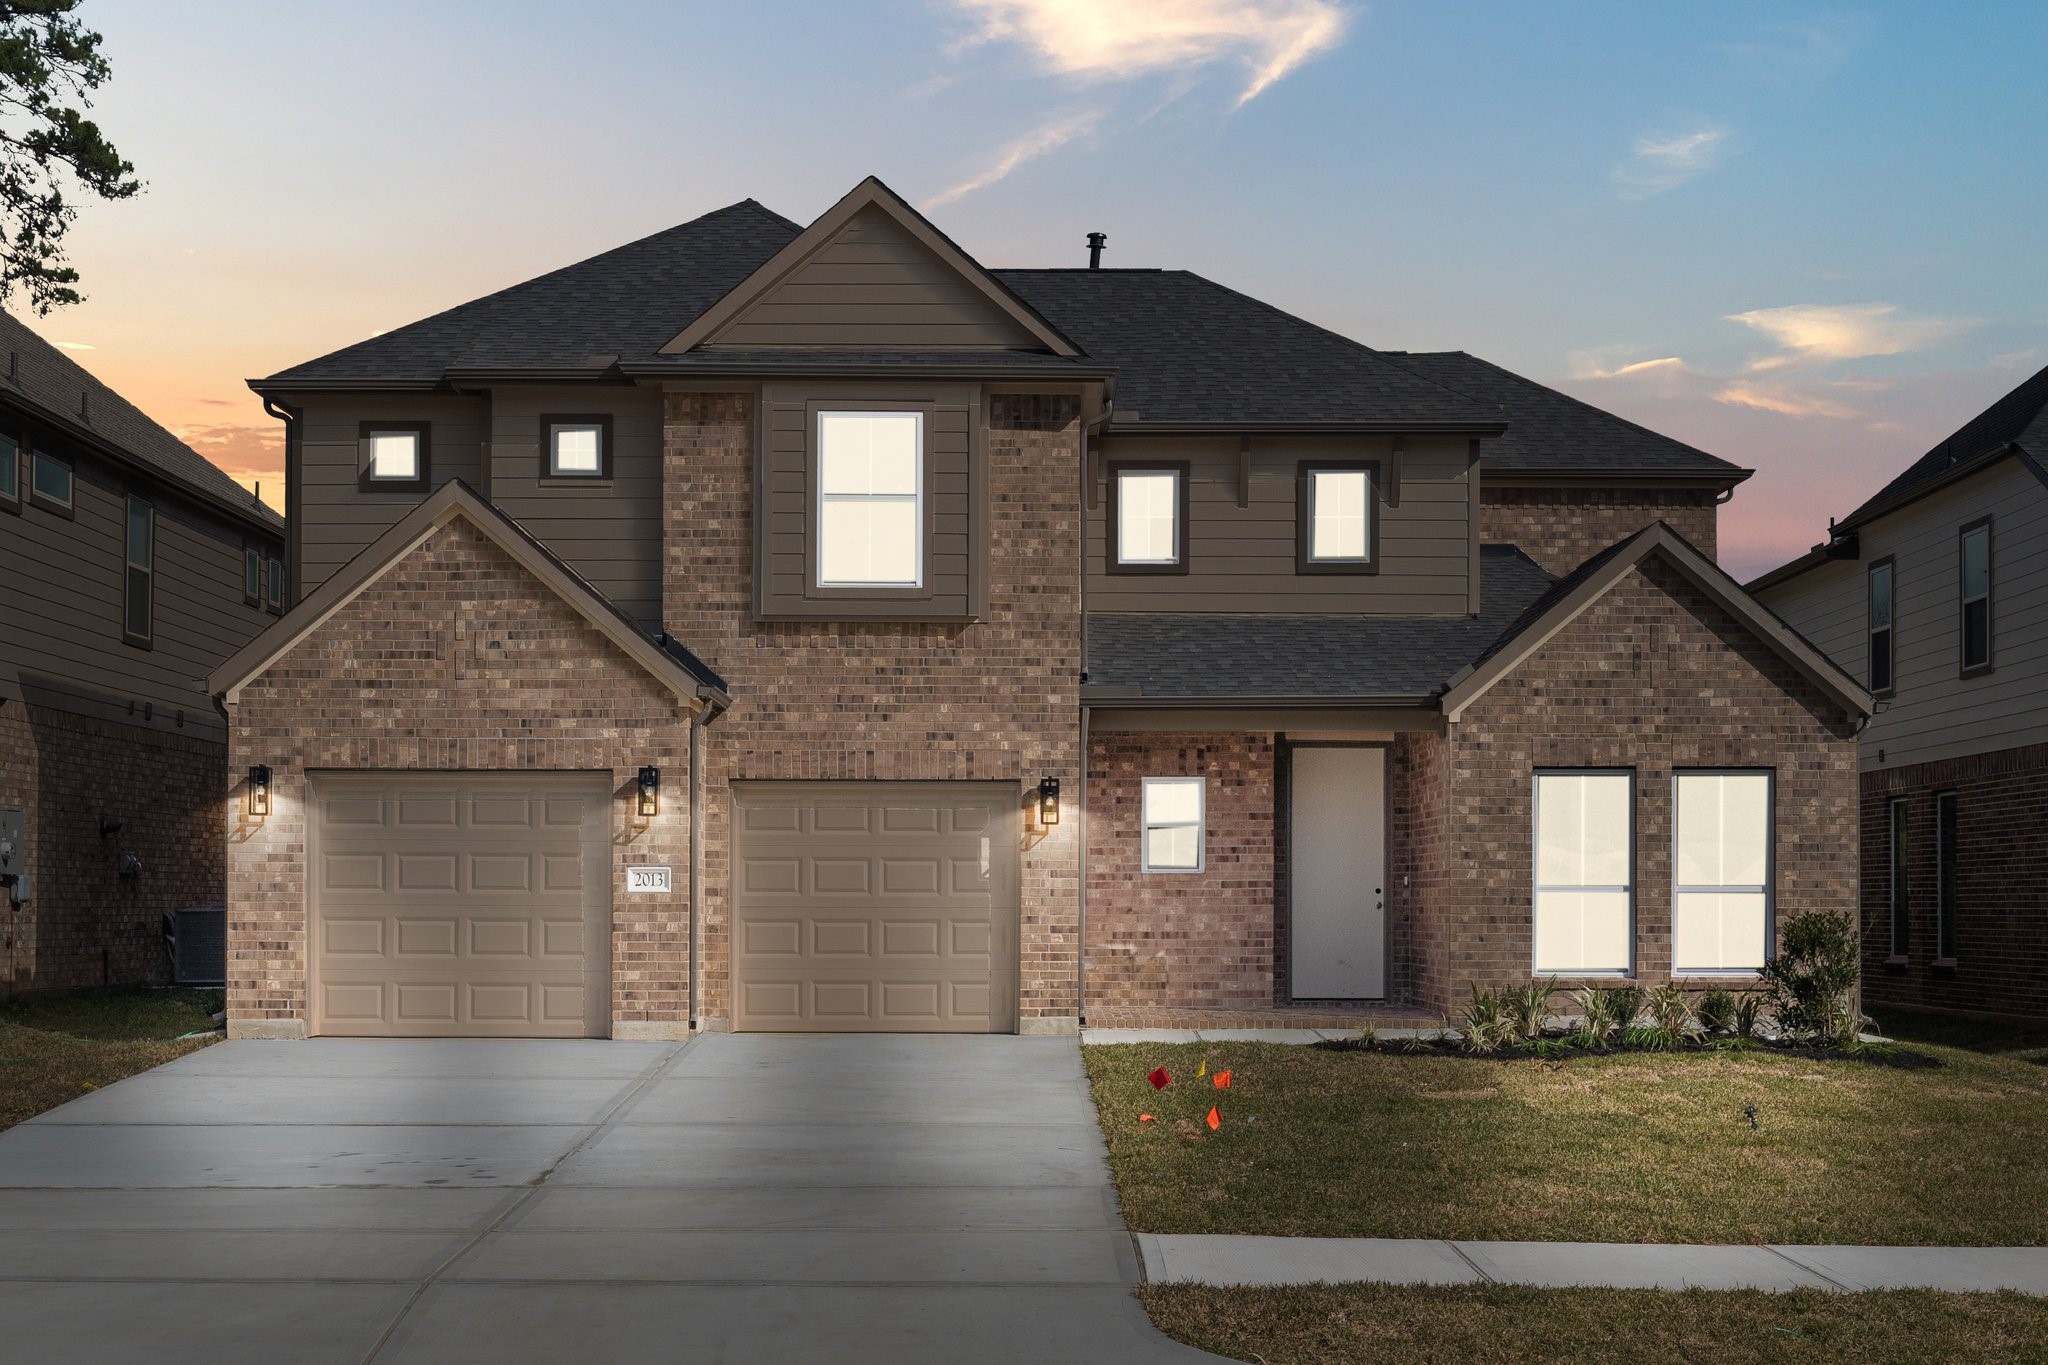 Welcome home to 2013 Piney Balsam Way located in the community of Barton Creek Ranch and zoned to Conroe ISD.